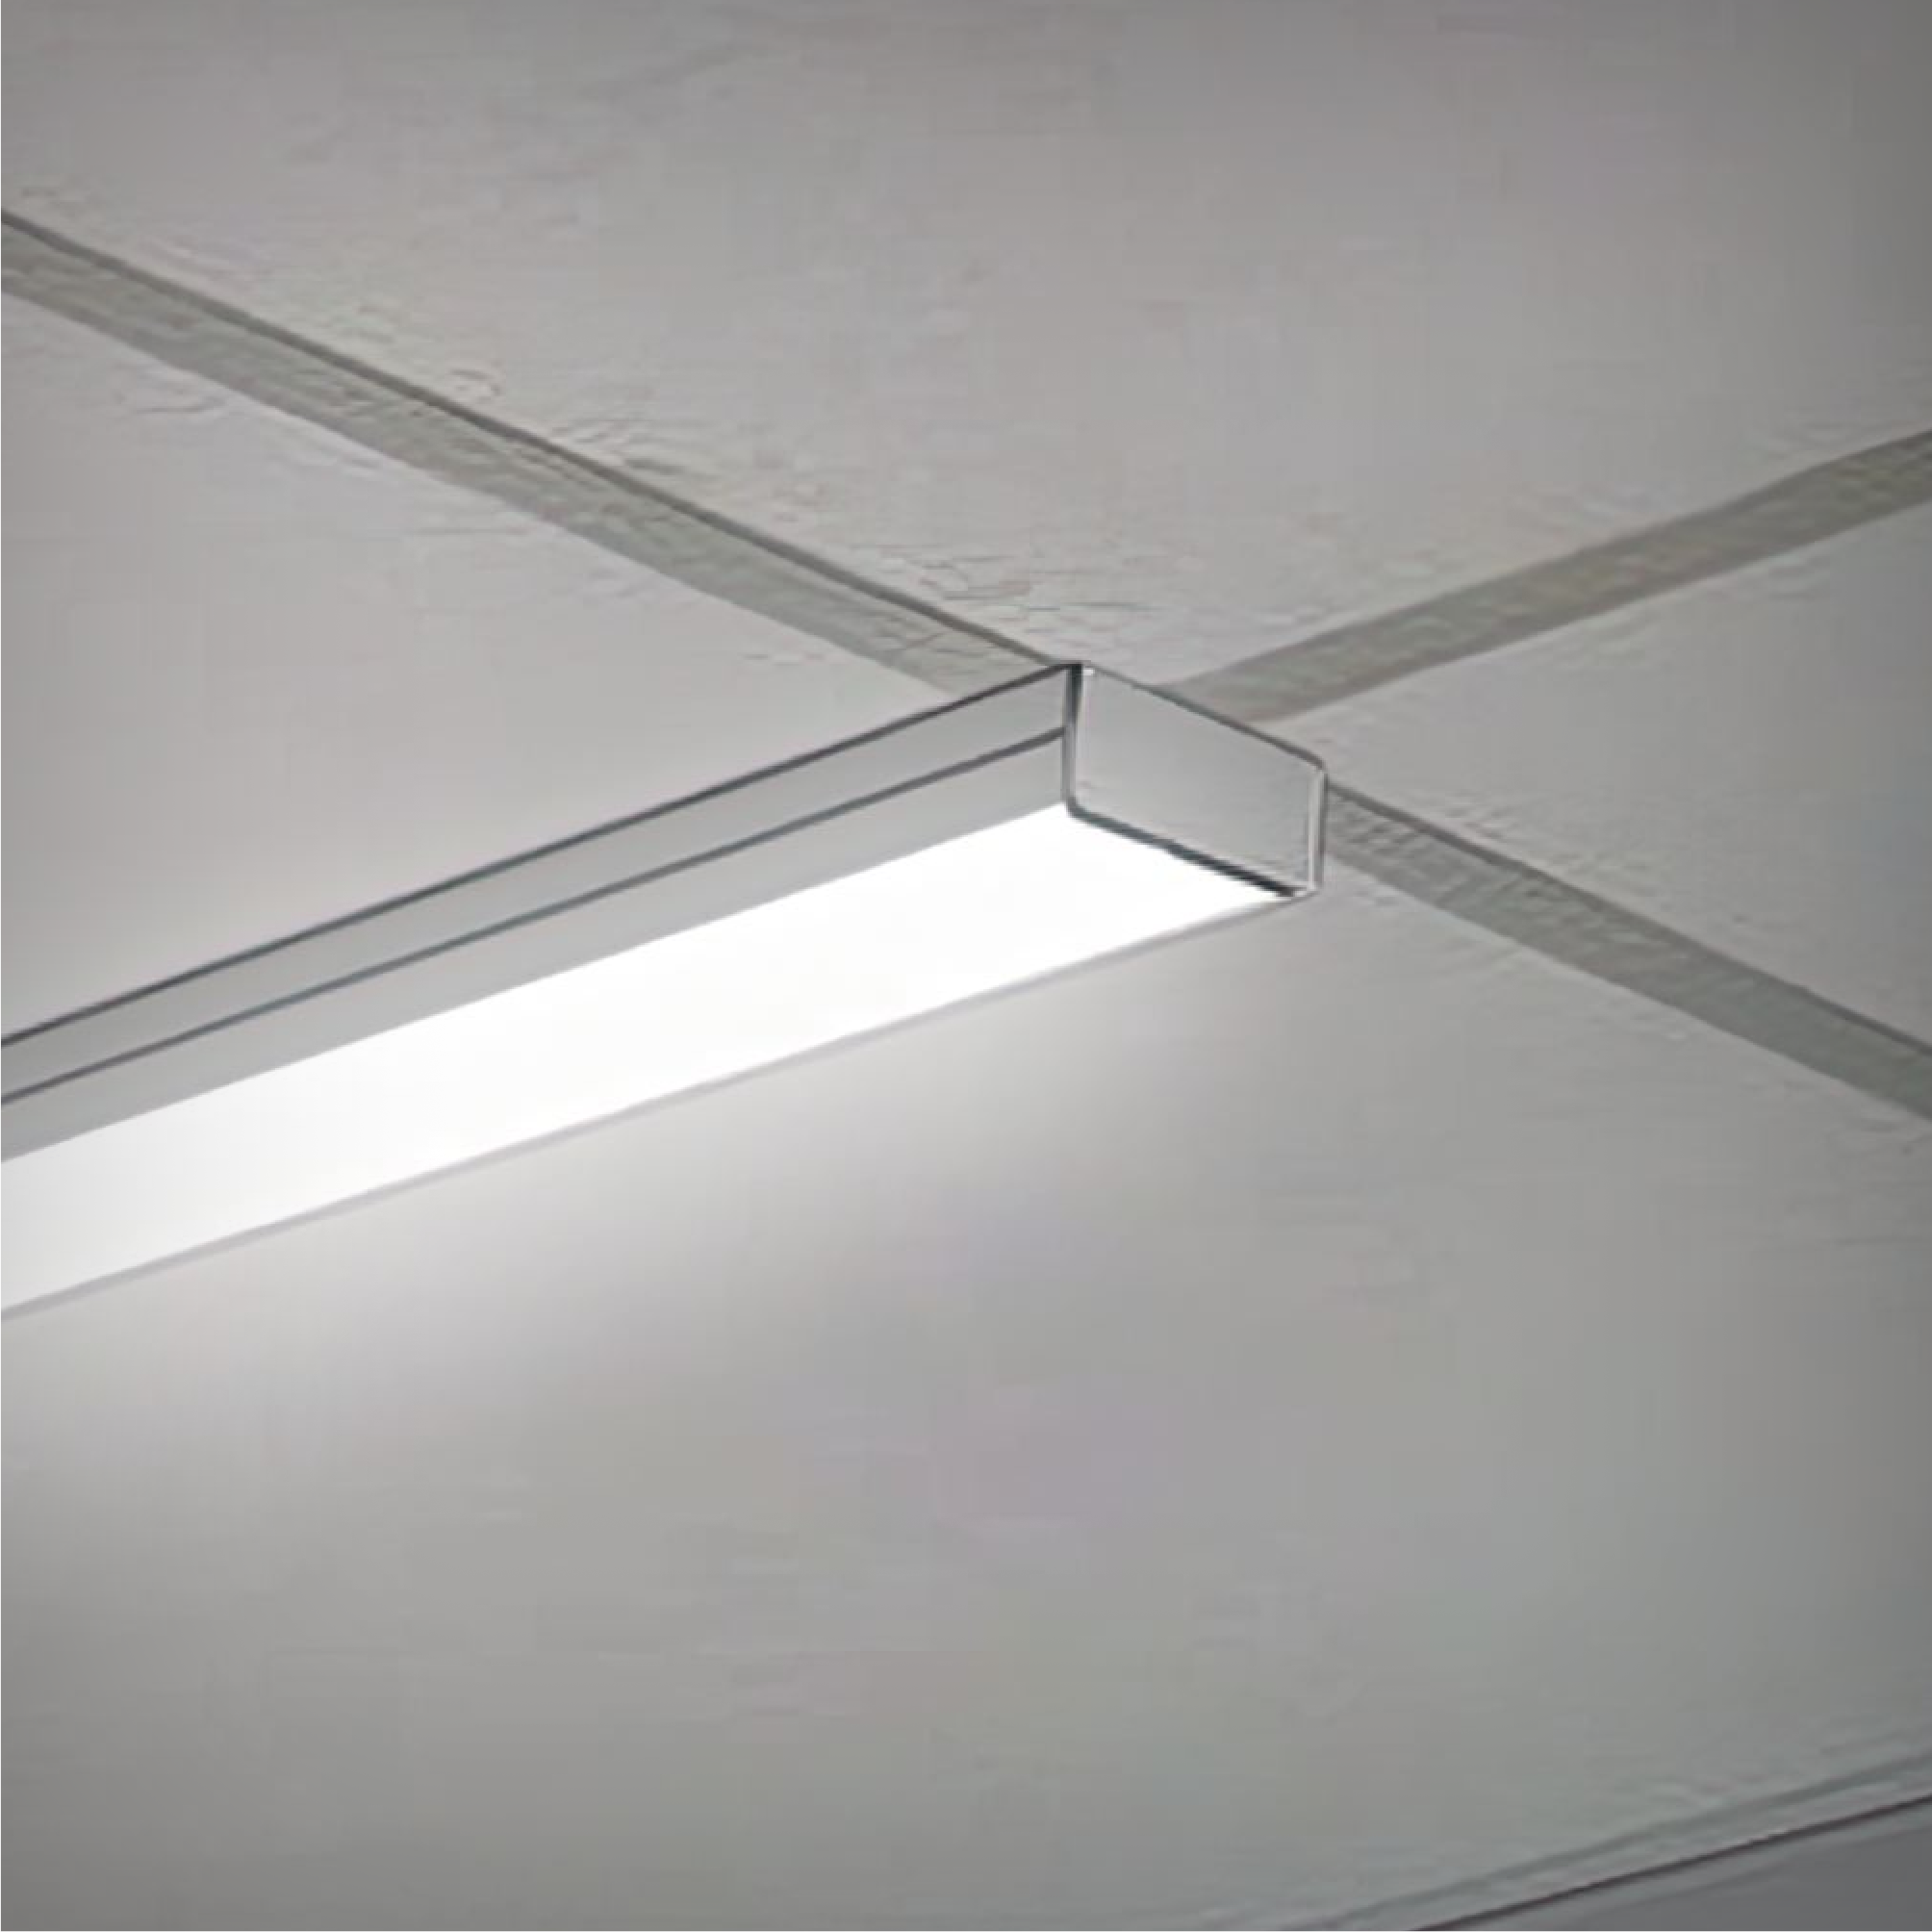 Low-profile Linear LED T-Bar Grid Ceiling Light with a 1-Inch profile